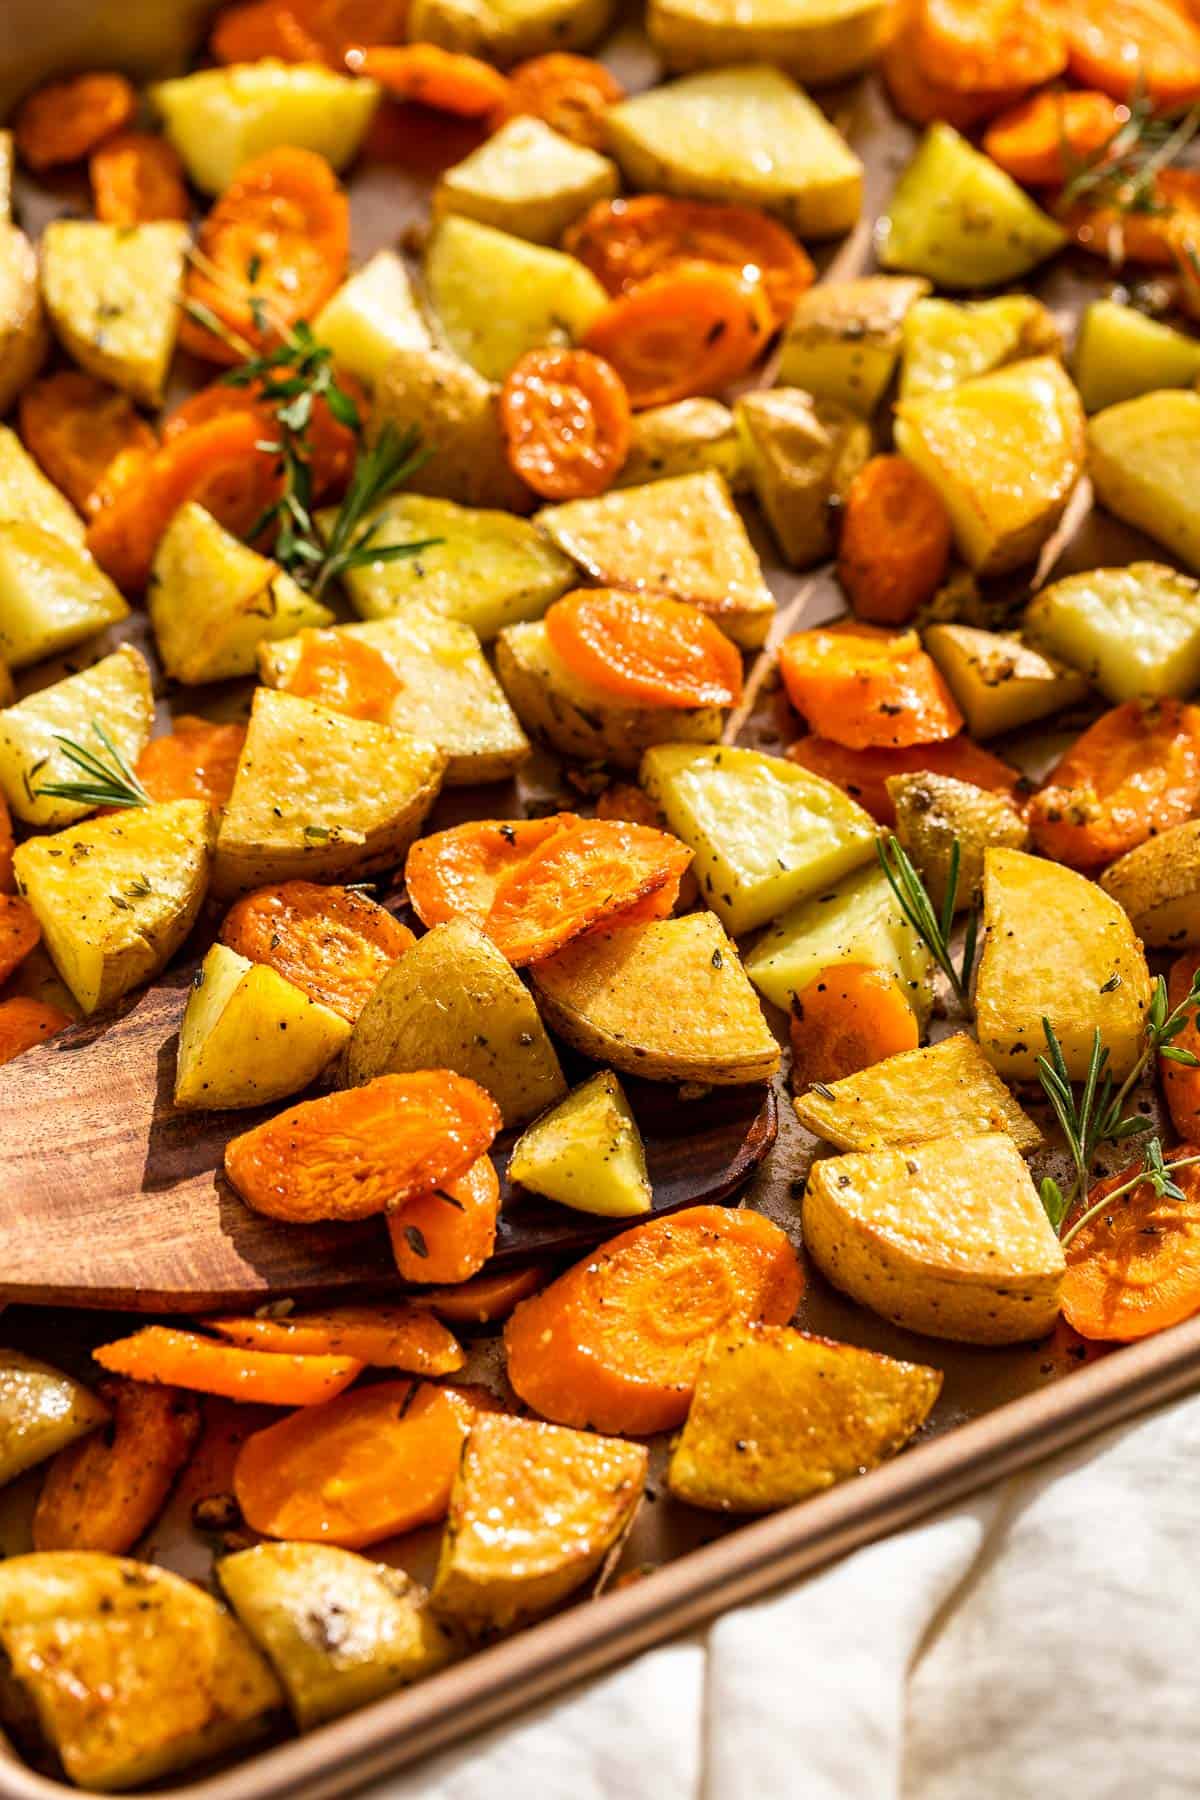 Roasted potatoes and carrots on a baking sheet with a wood spatula scooping some up.